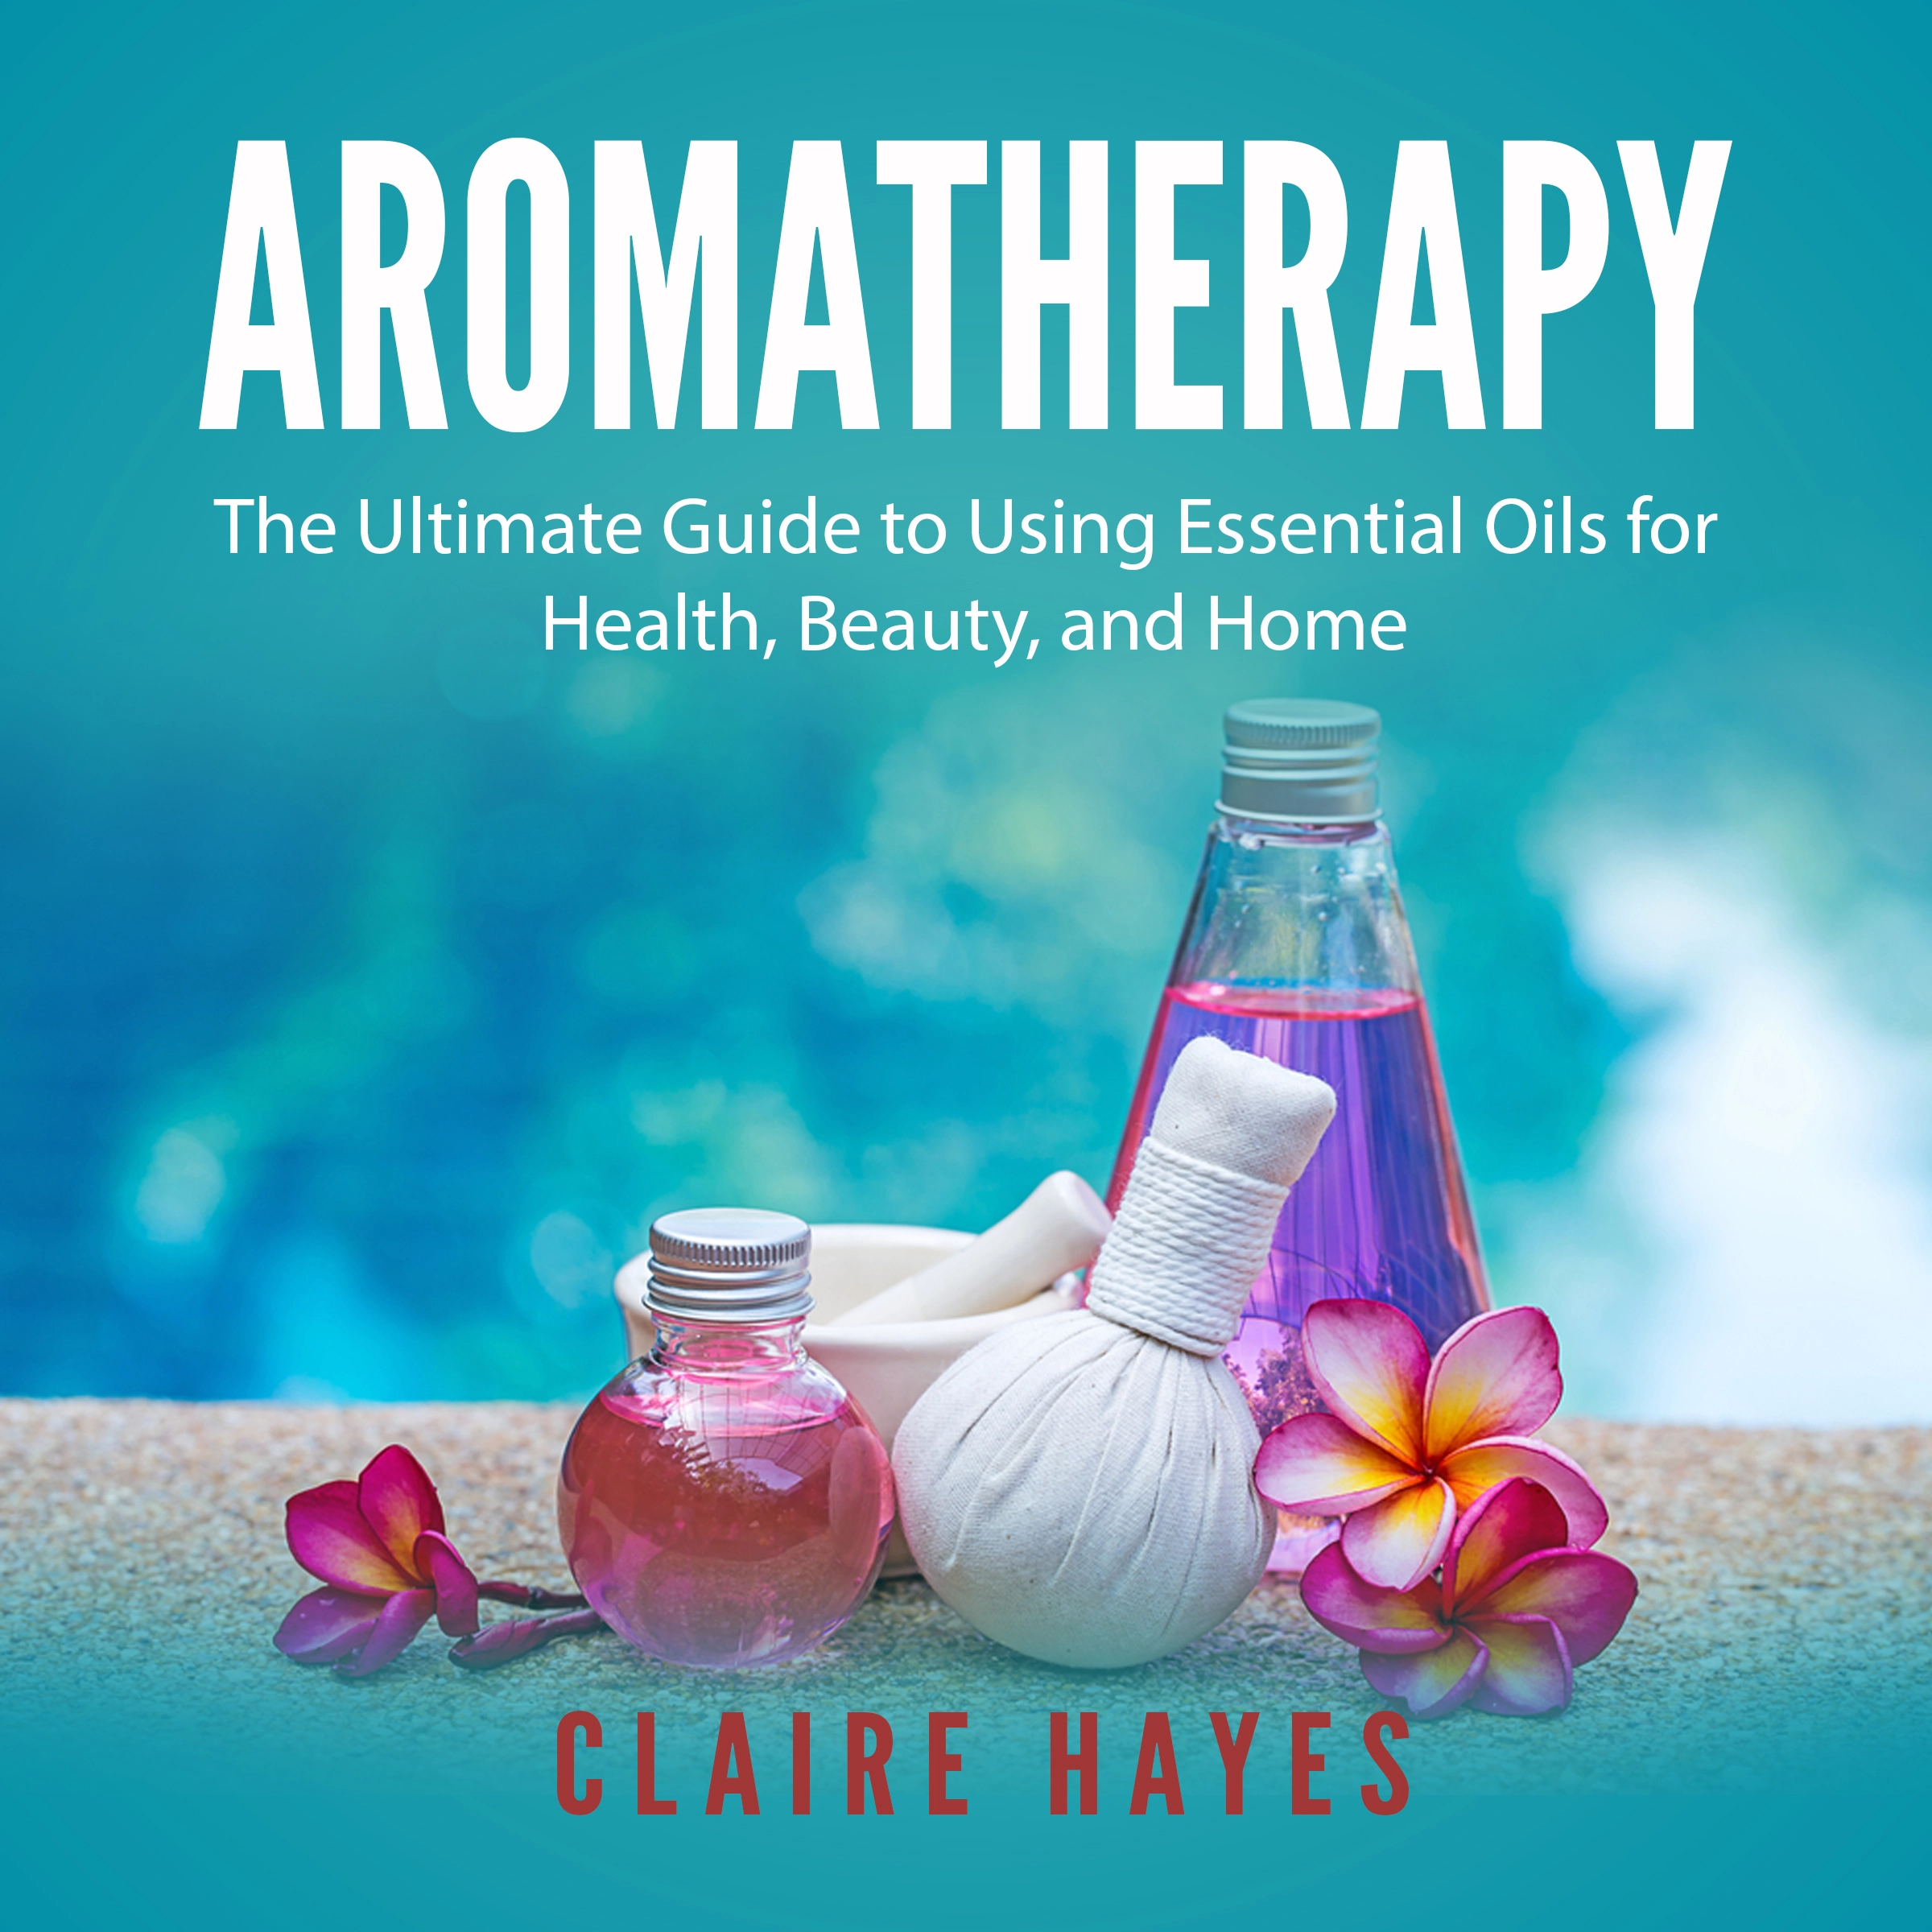 Aromatherapy: The Ultimate Guide to Using Essential Oils for Health, Beauty, and Home Audiobook by Claire Hayes